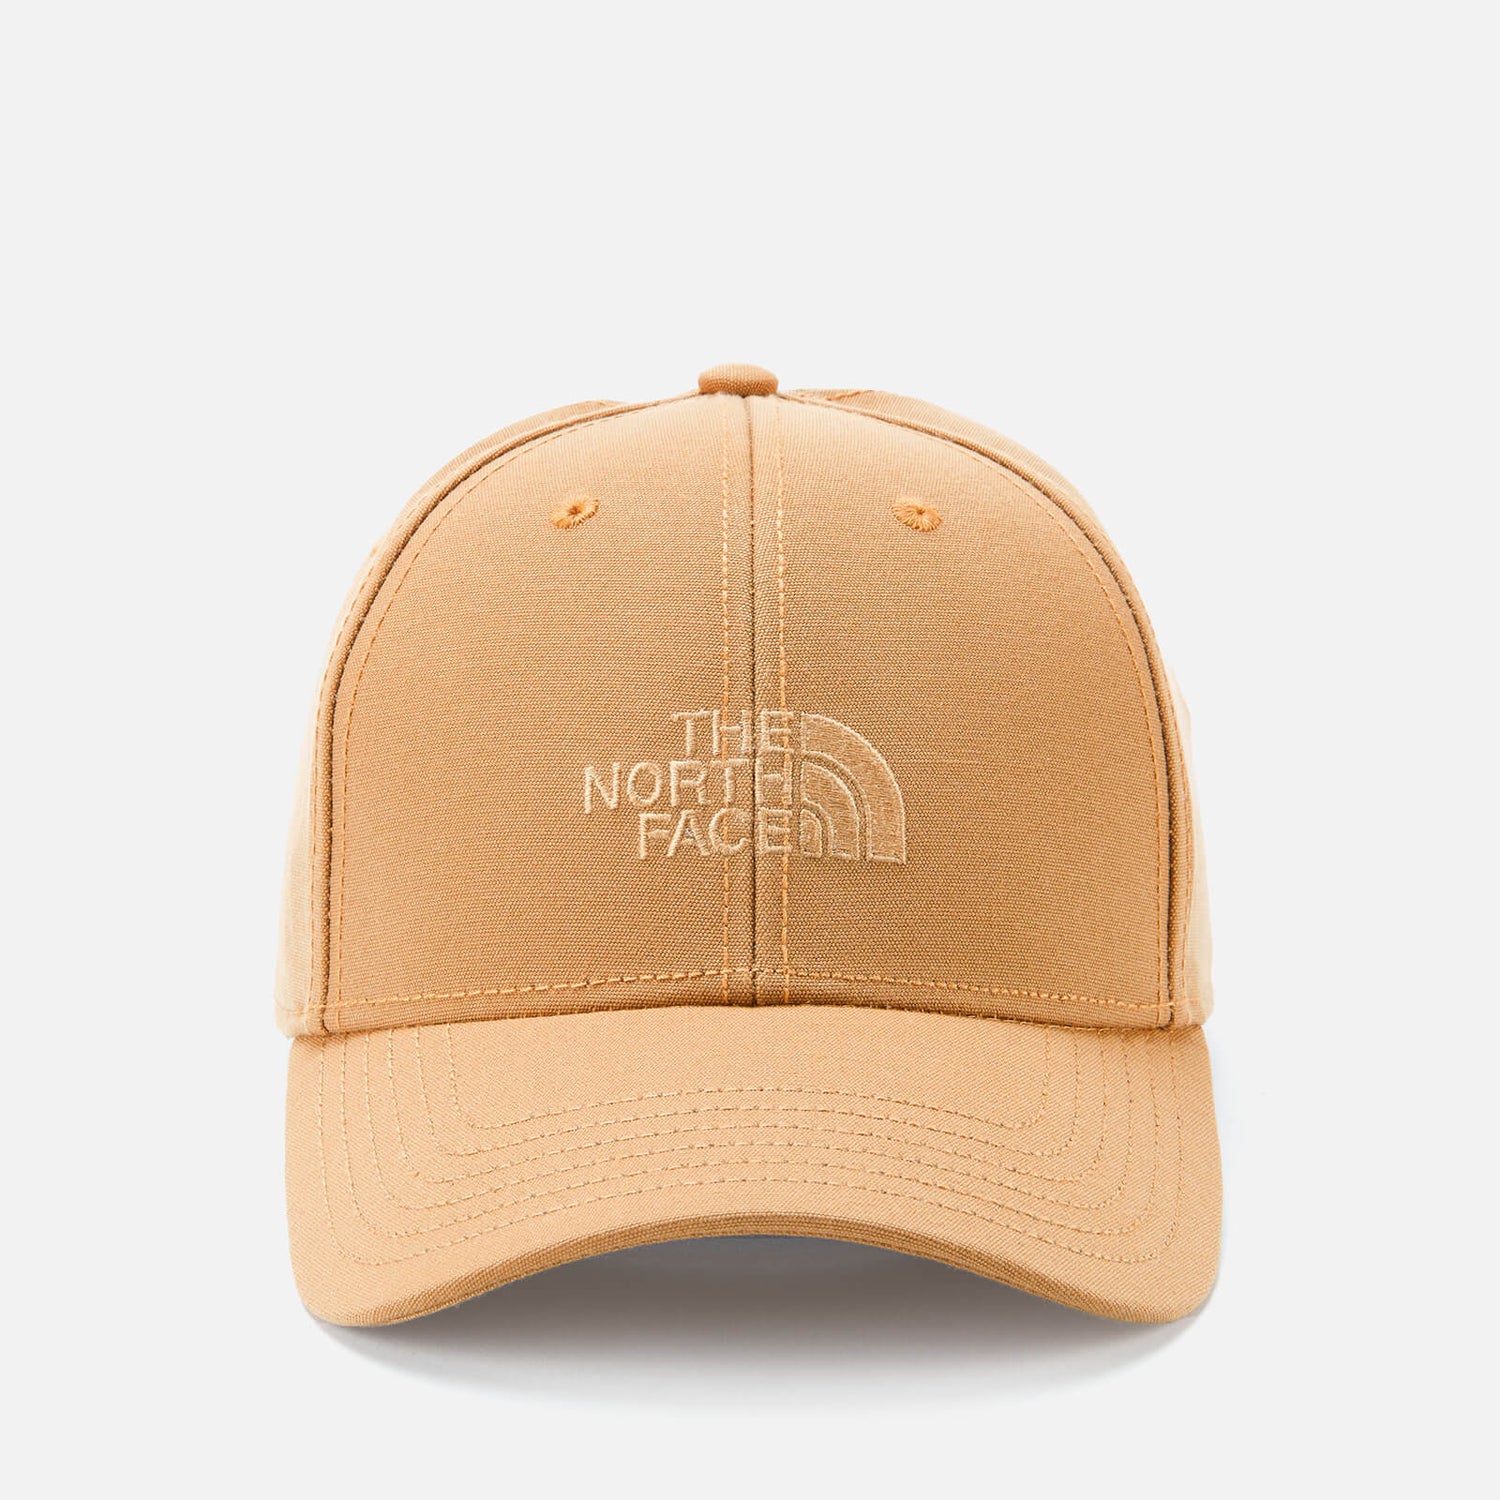 The North Face Recycled 66 Classic Cap - Utility Brown